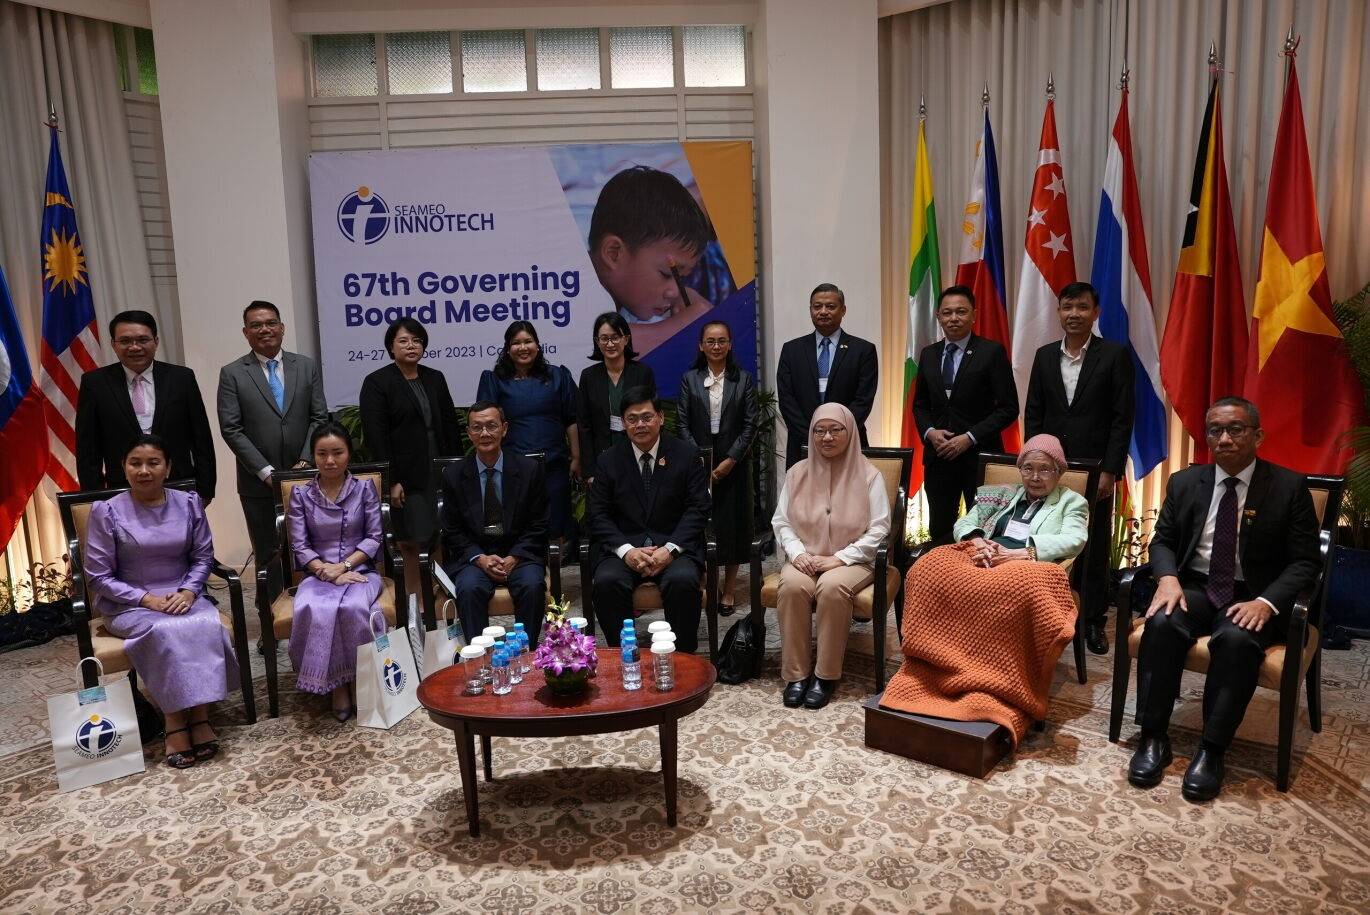 Members of the Governing Board, composed of senior representatives from the Ministries of Education (MOEs) of SEAMEO Member countries, with the SEAMEO Secretariat Director Datuk Dr Habibah Abdul Rahim and the INNOTECH Center Director Prof. Leonor Magtolis Briones, pose for Day 1 of the 67th Governing Board Meeting held in Cambodia.